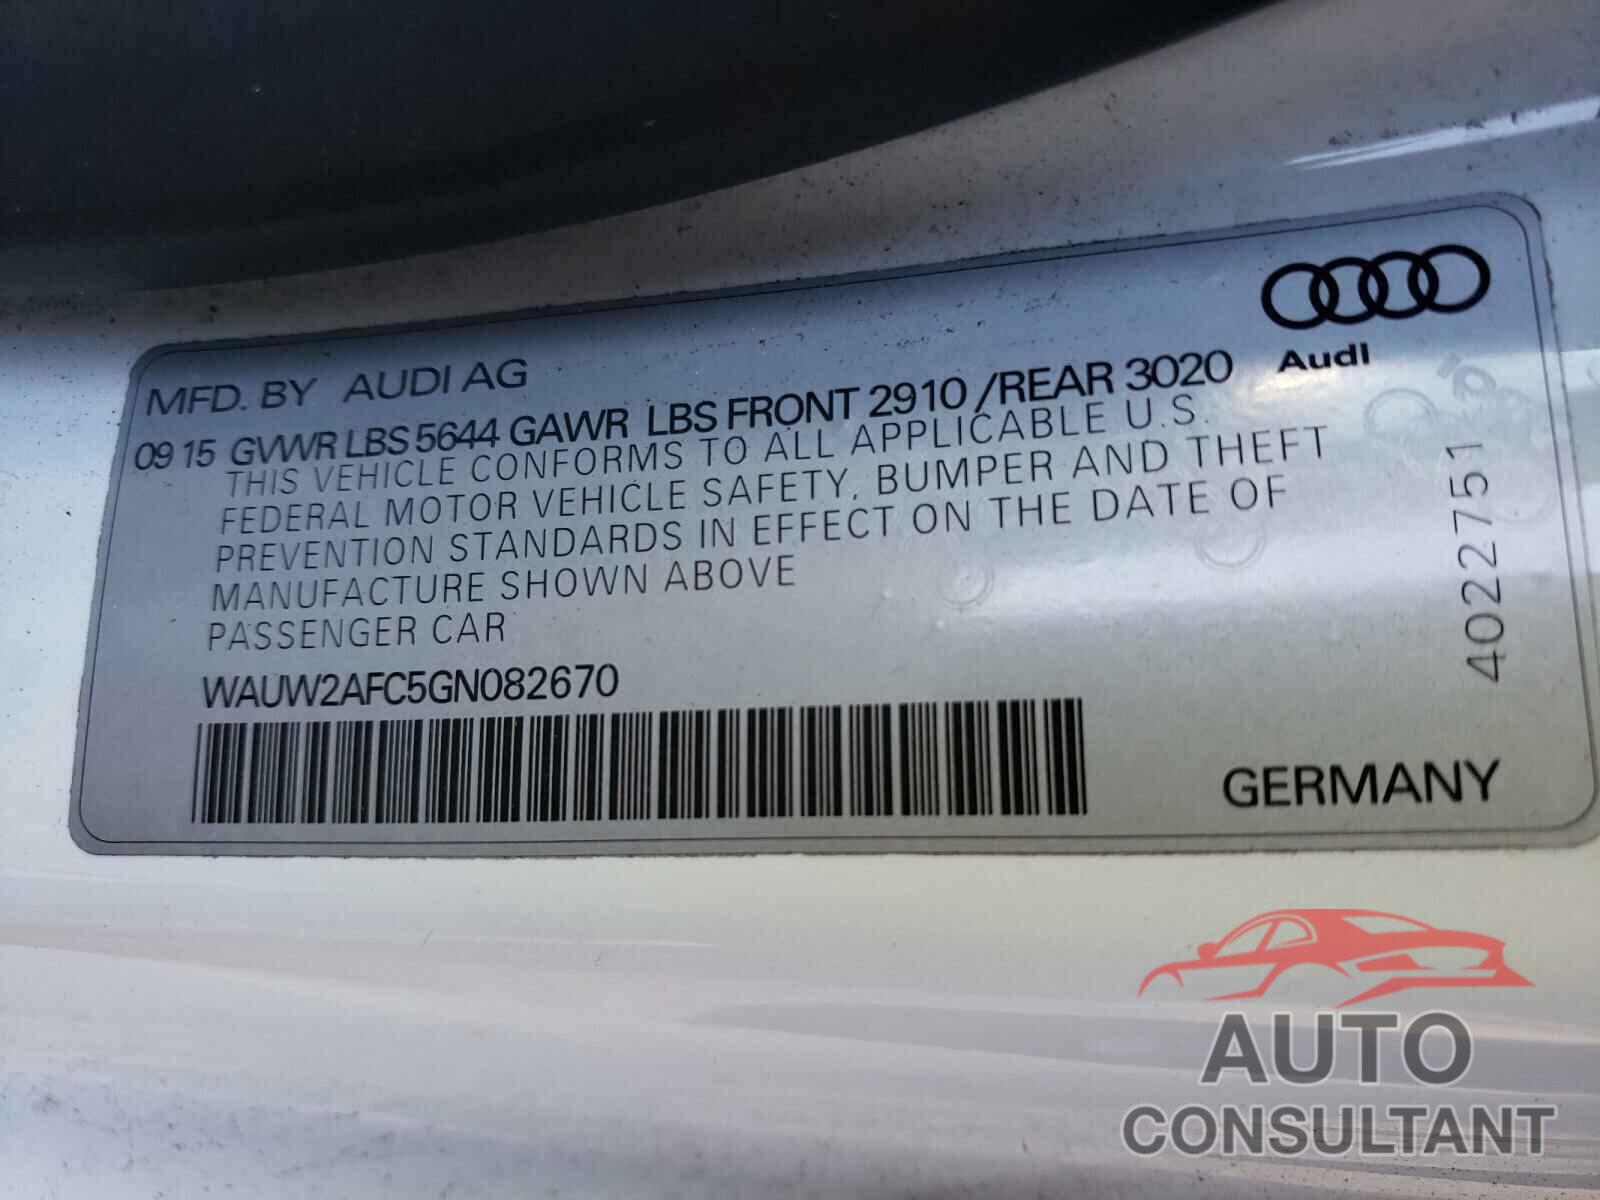 AUDI S7/RS7 2016 - WAUW2AFC5GN082670